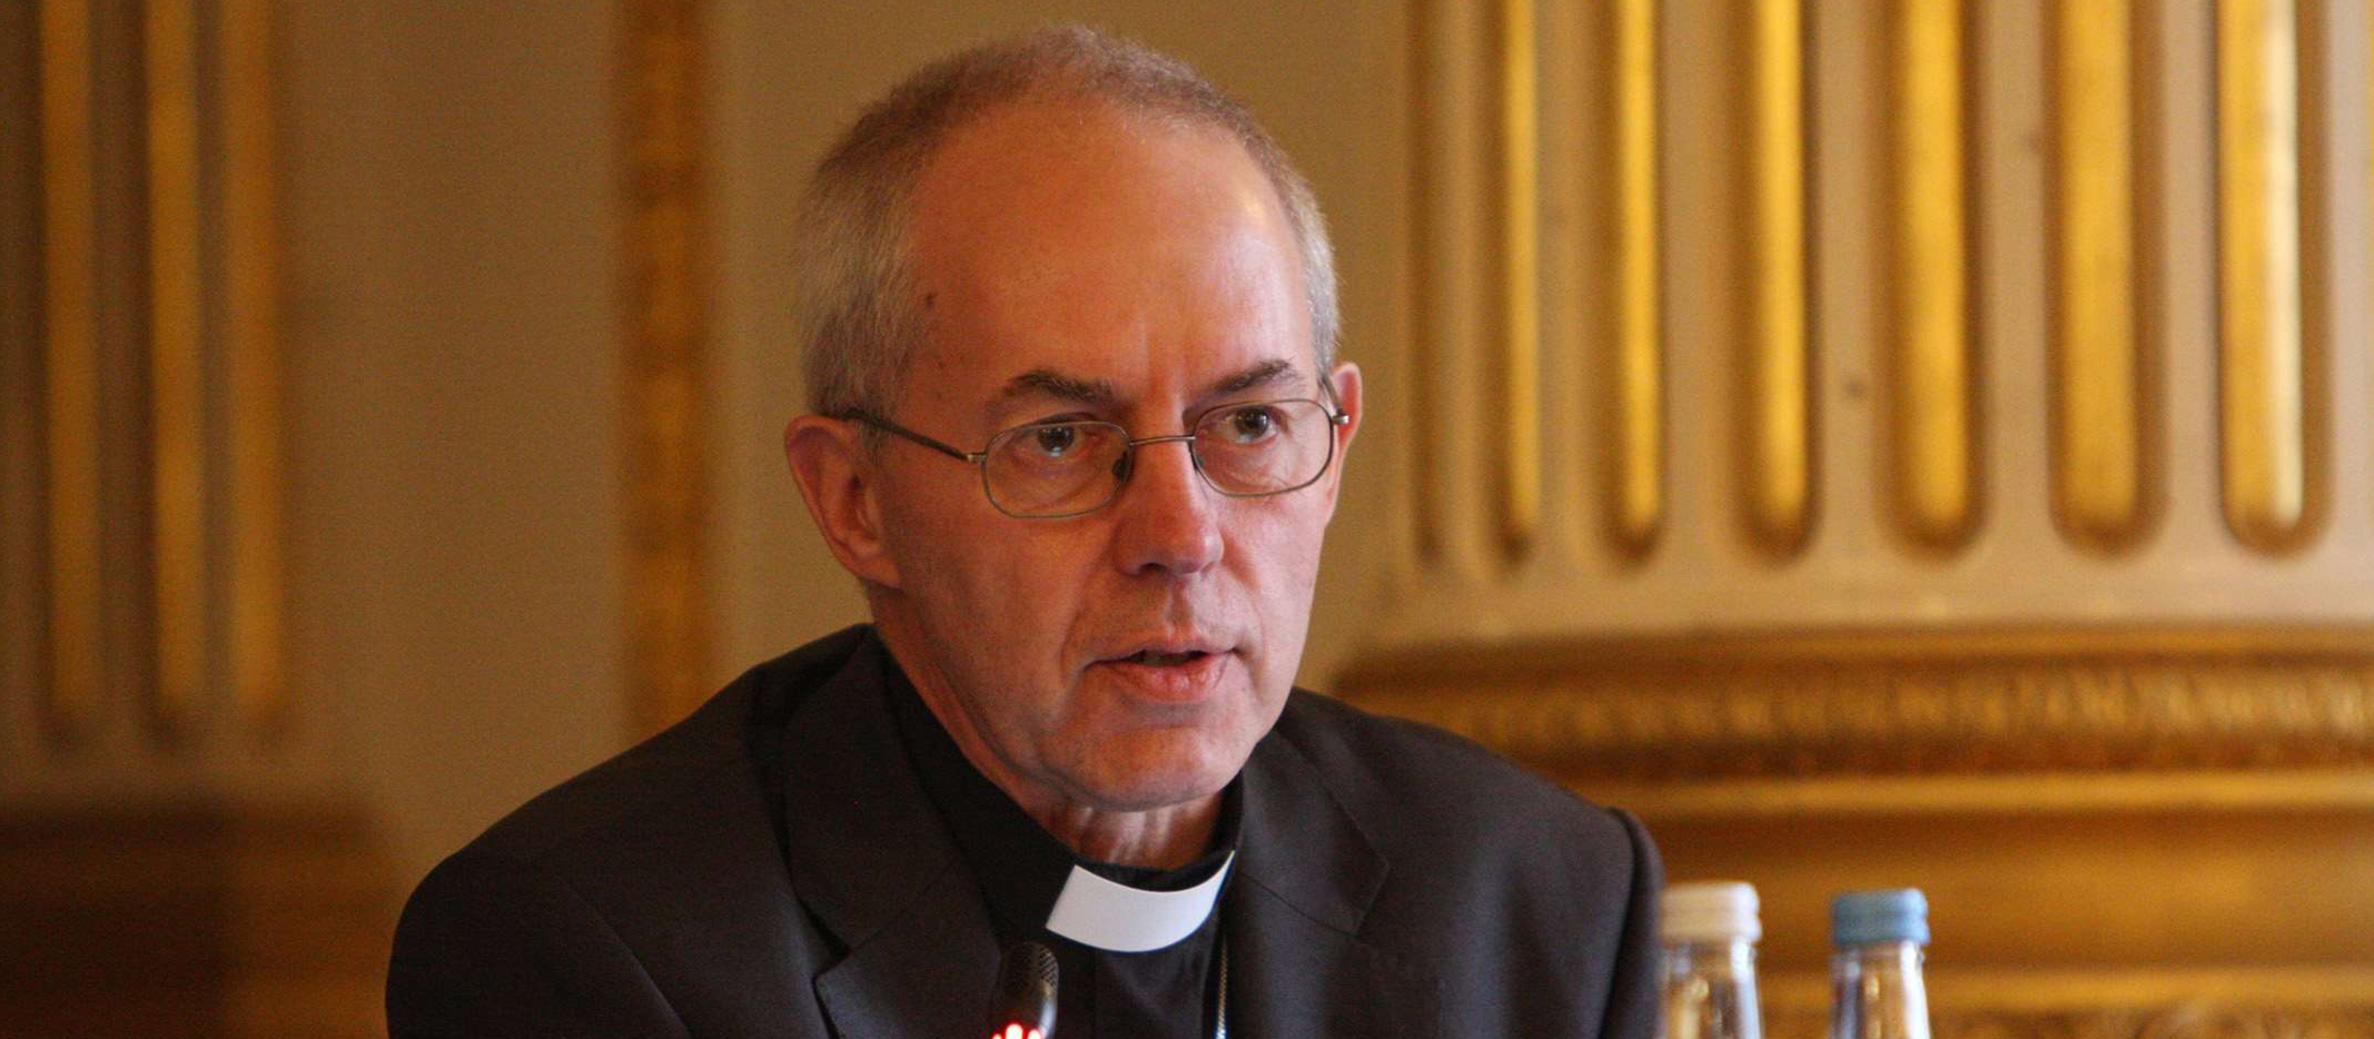 Archbishop of Canterbury: Anti-Semitism is ‘embedded’ in British culture